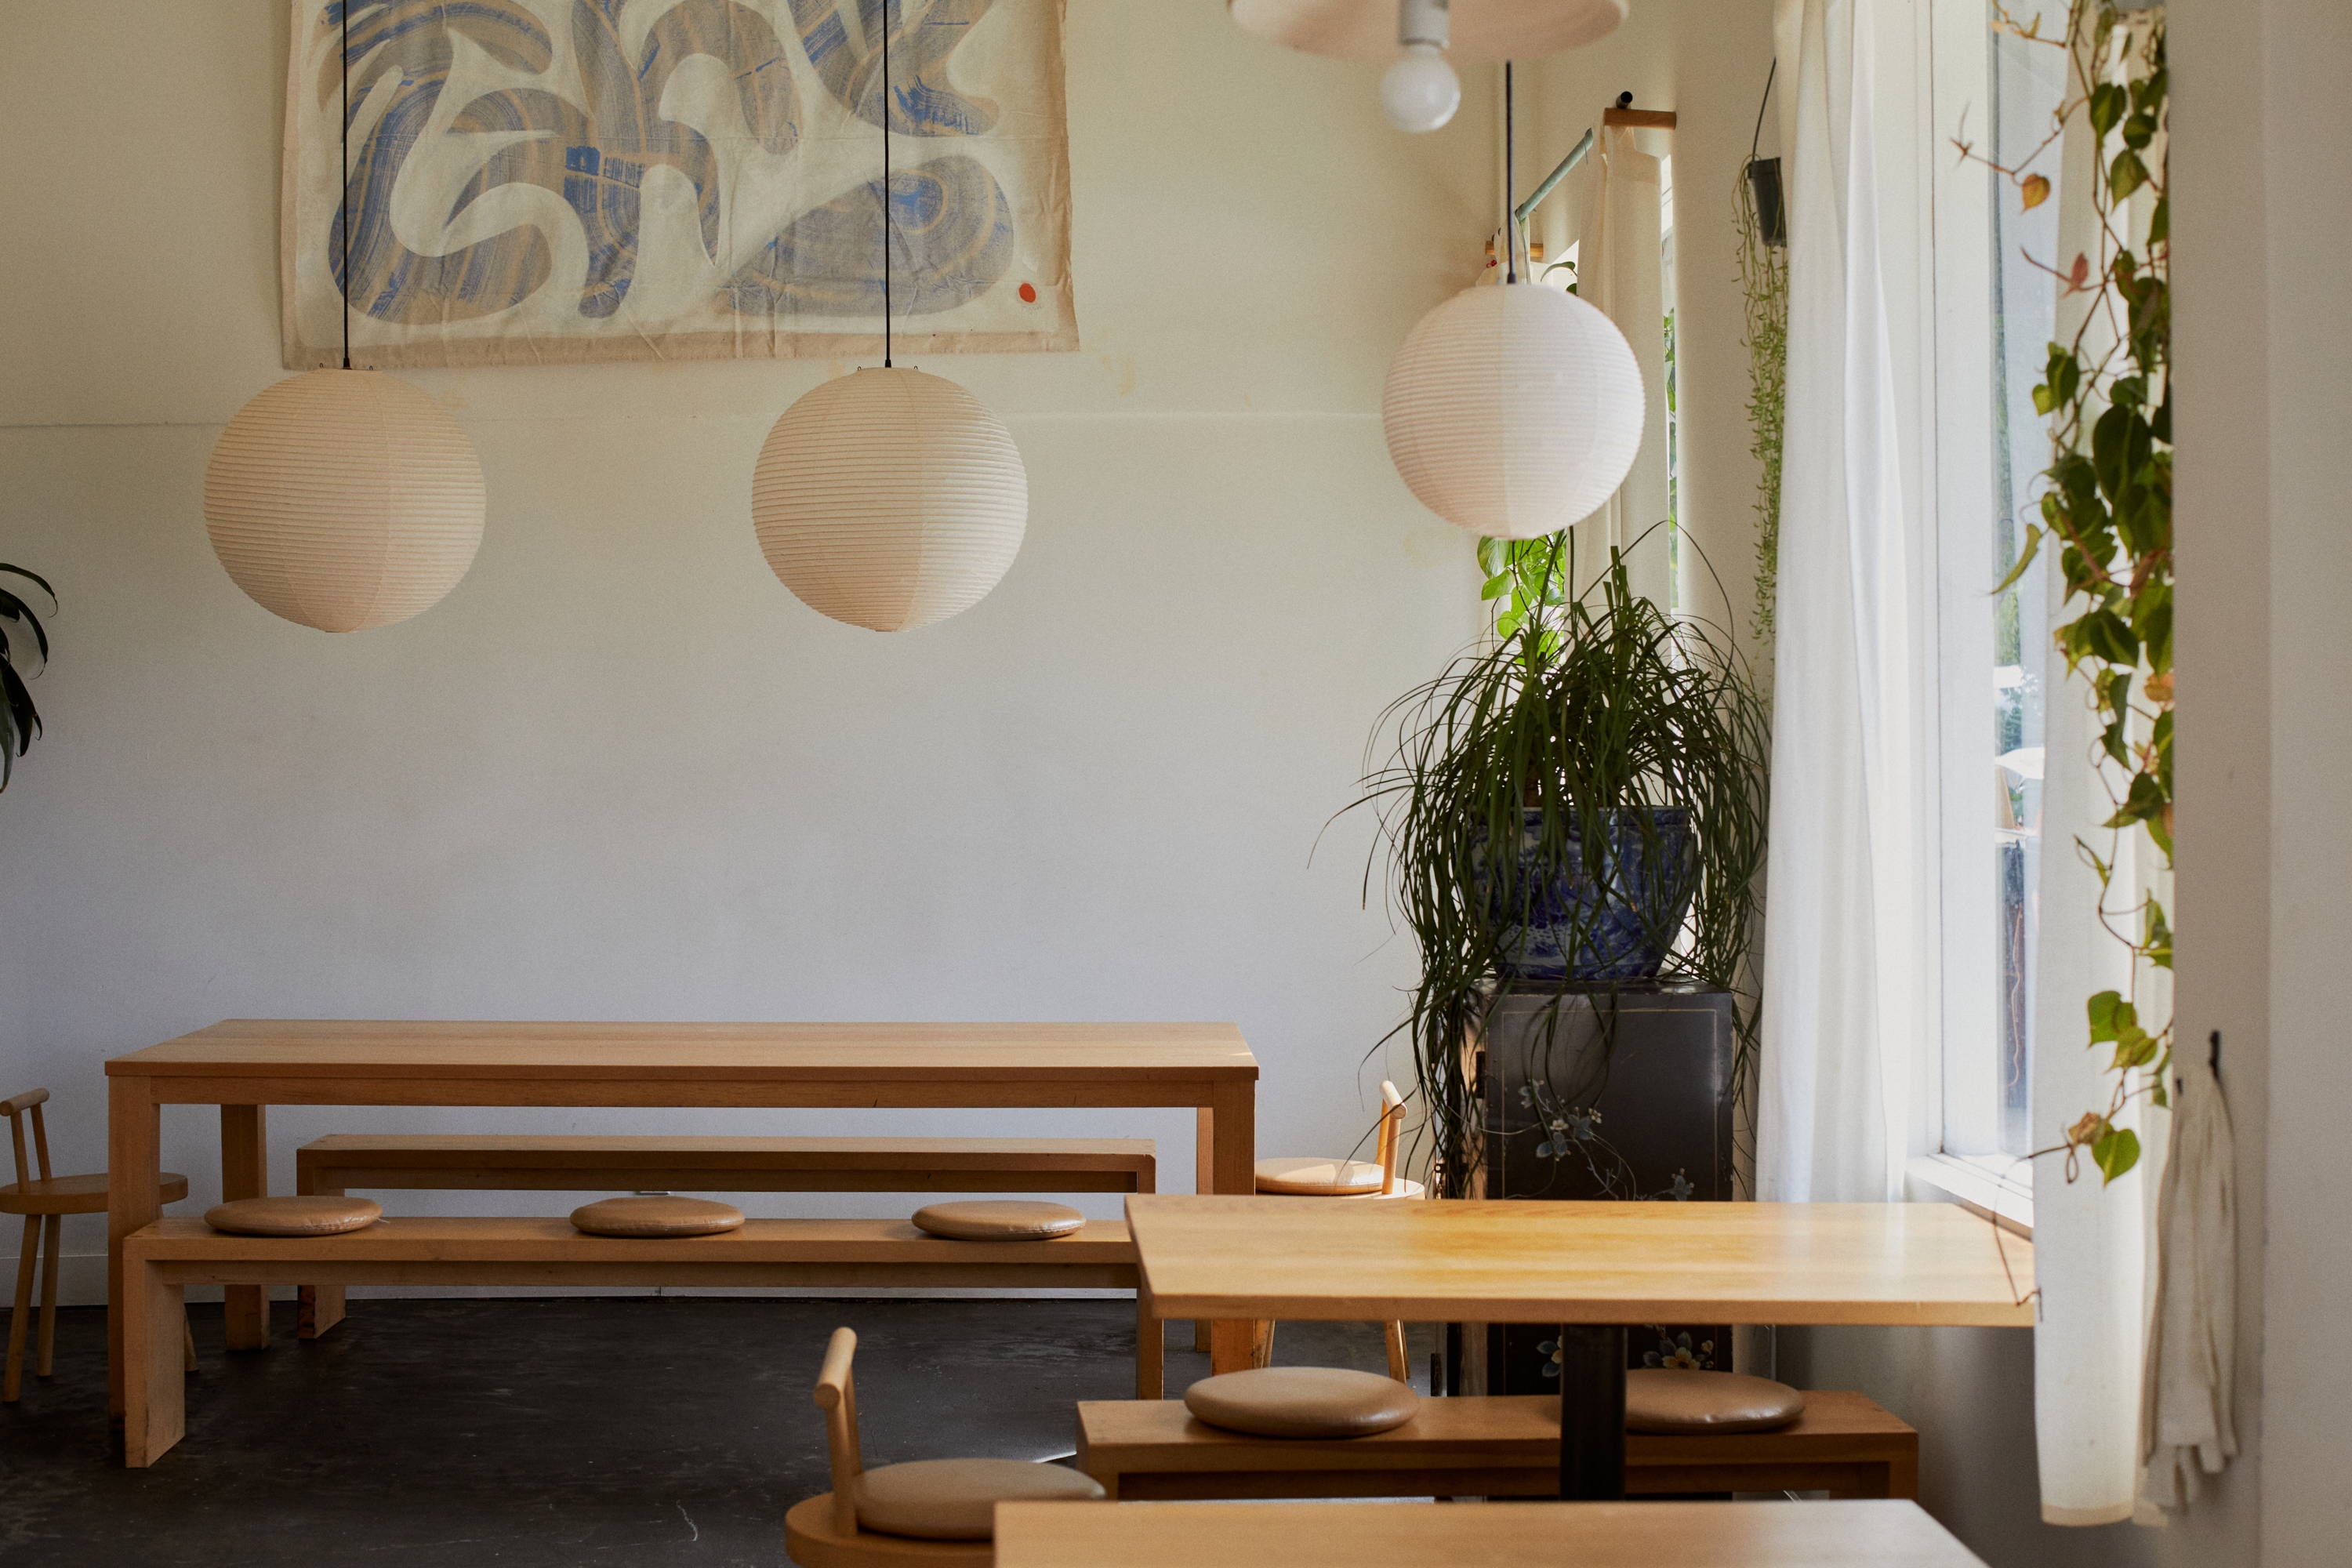 Dining area with plants, cool lighting, warm wood tables, benches with cushions